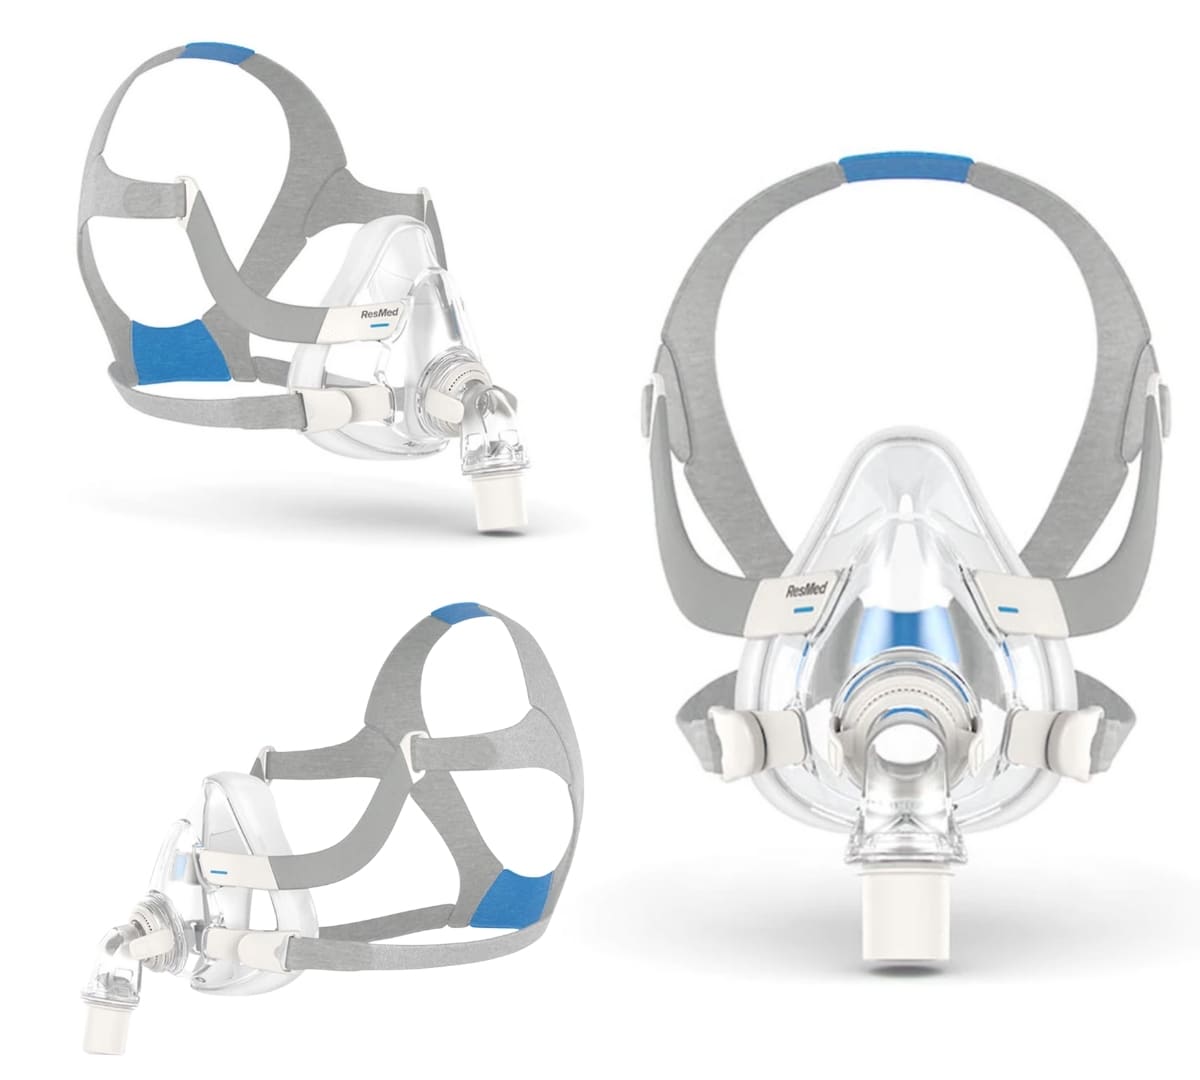 three different angles of the AirFit F20 mask